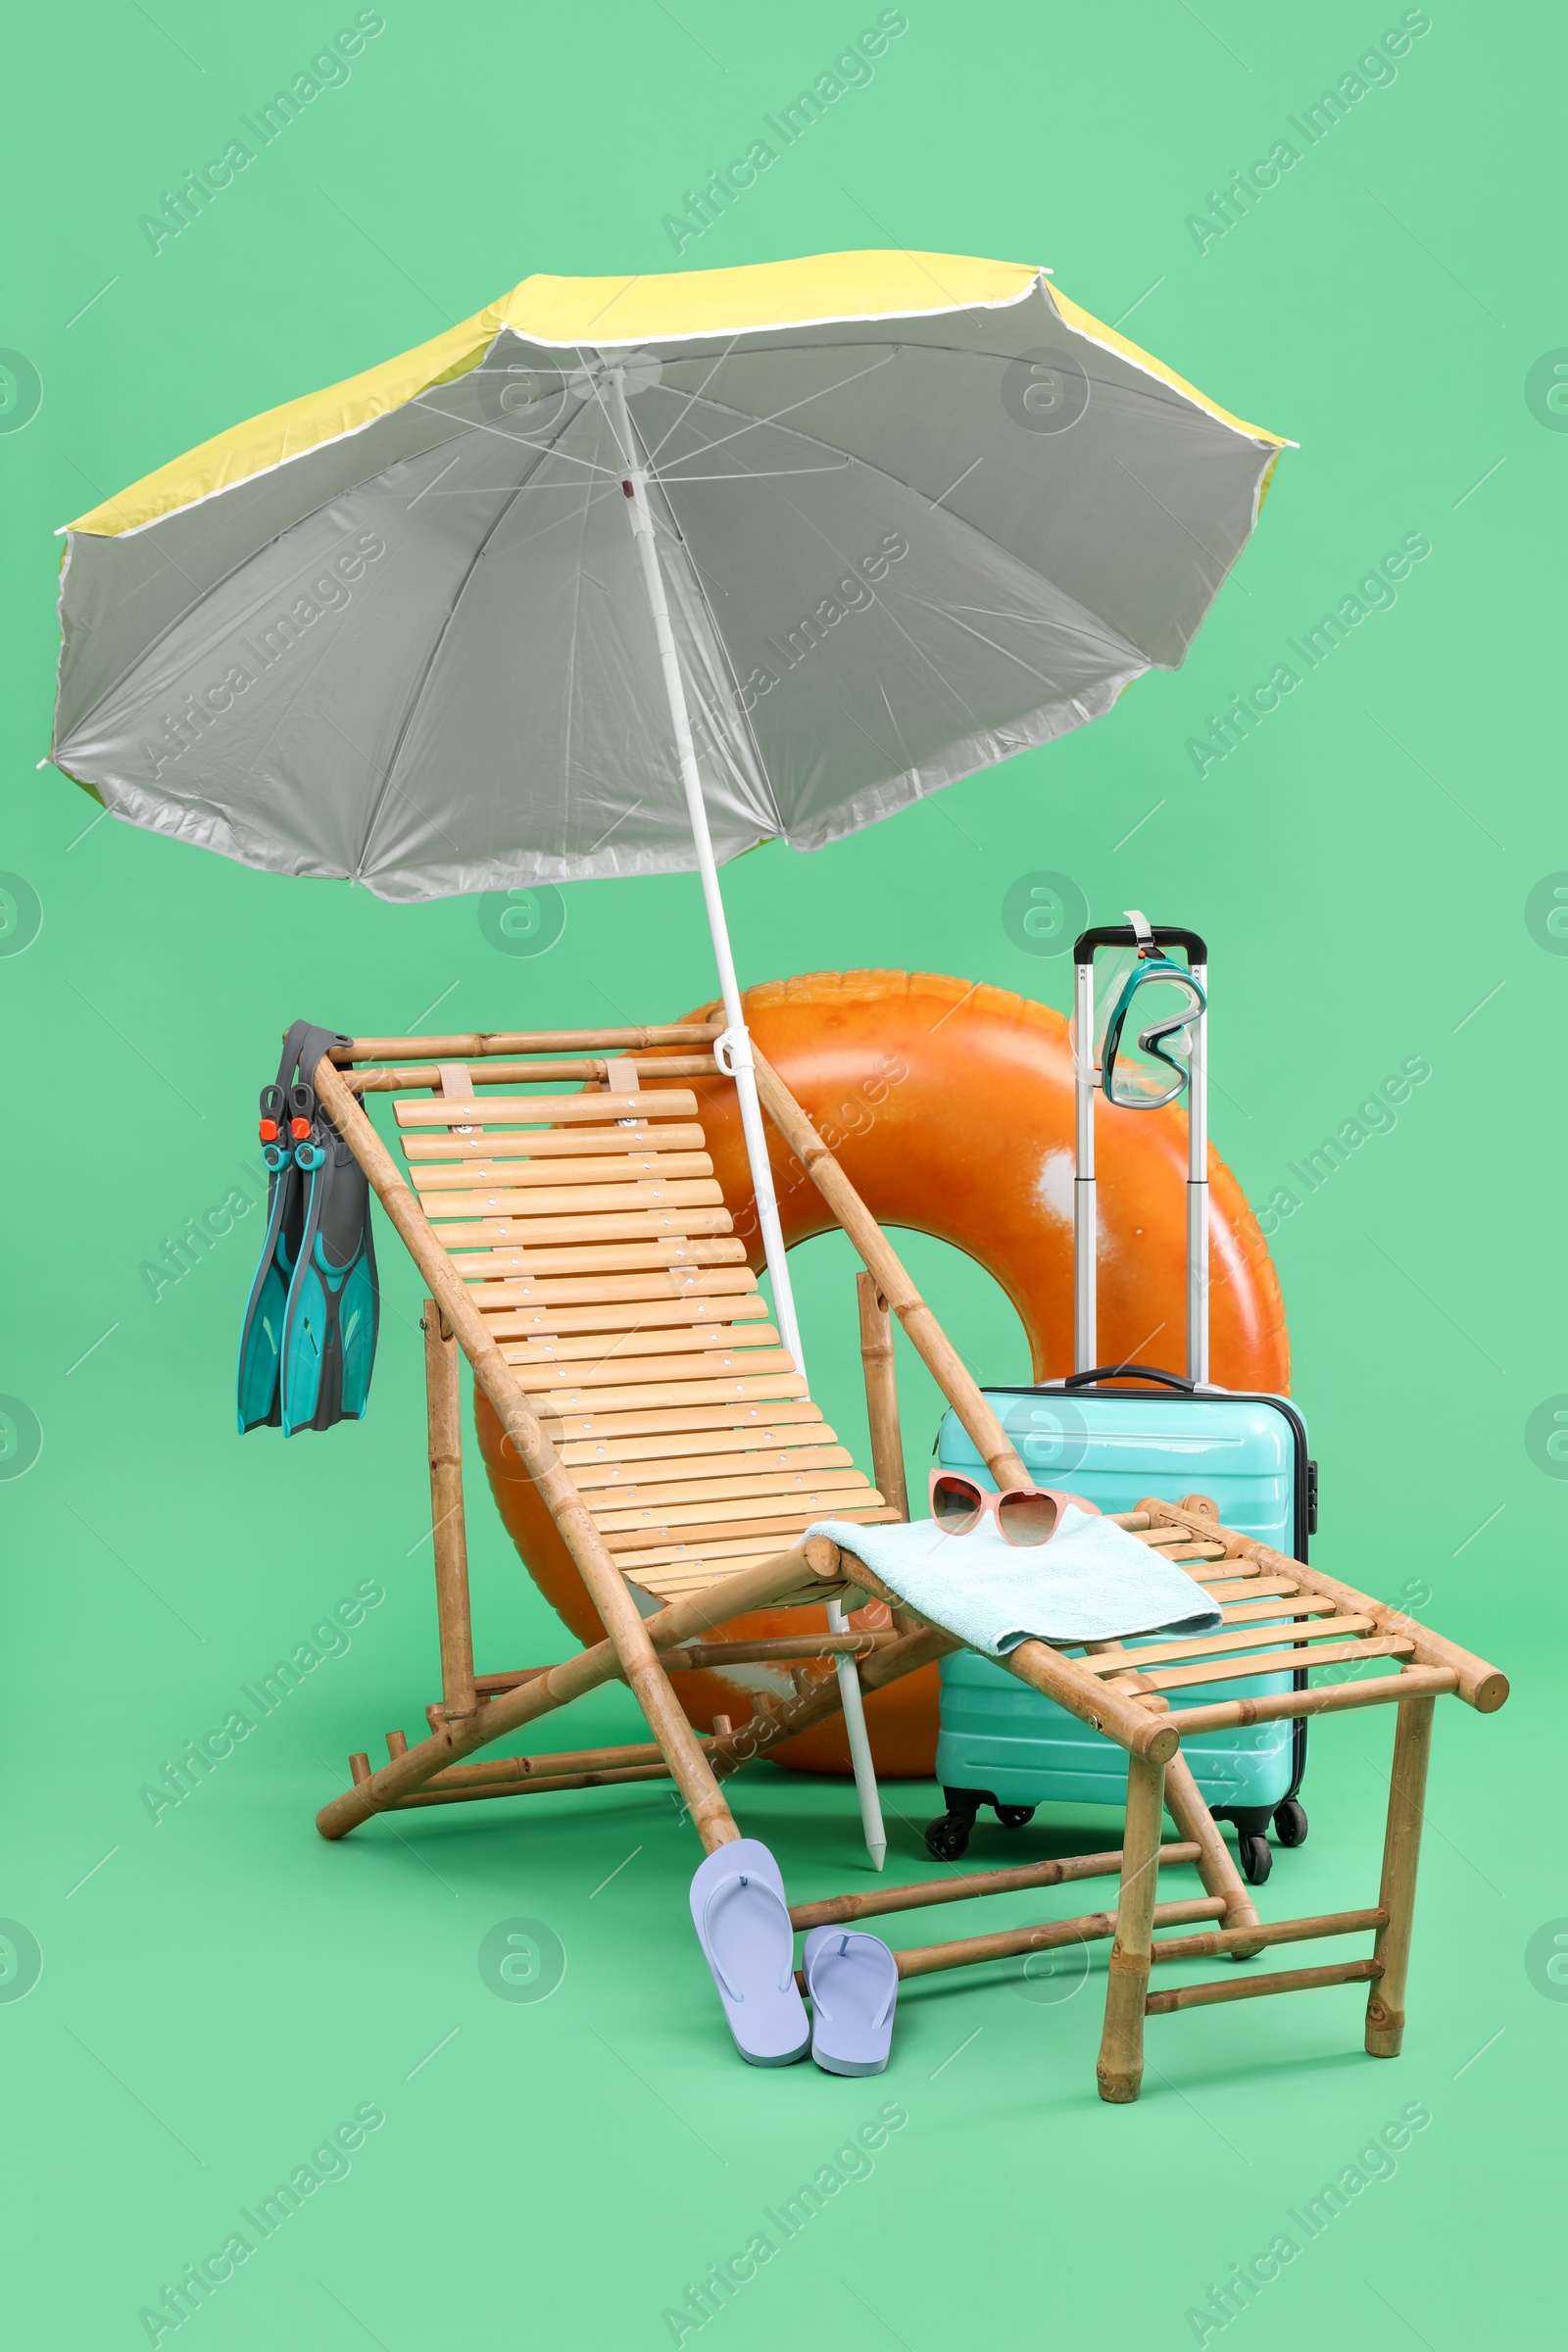 Photo of Deck chair, umbrella, suitcase and beach accessories against green background. Summer vacation